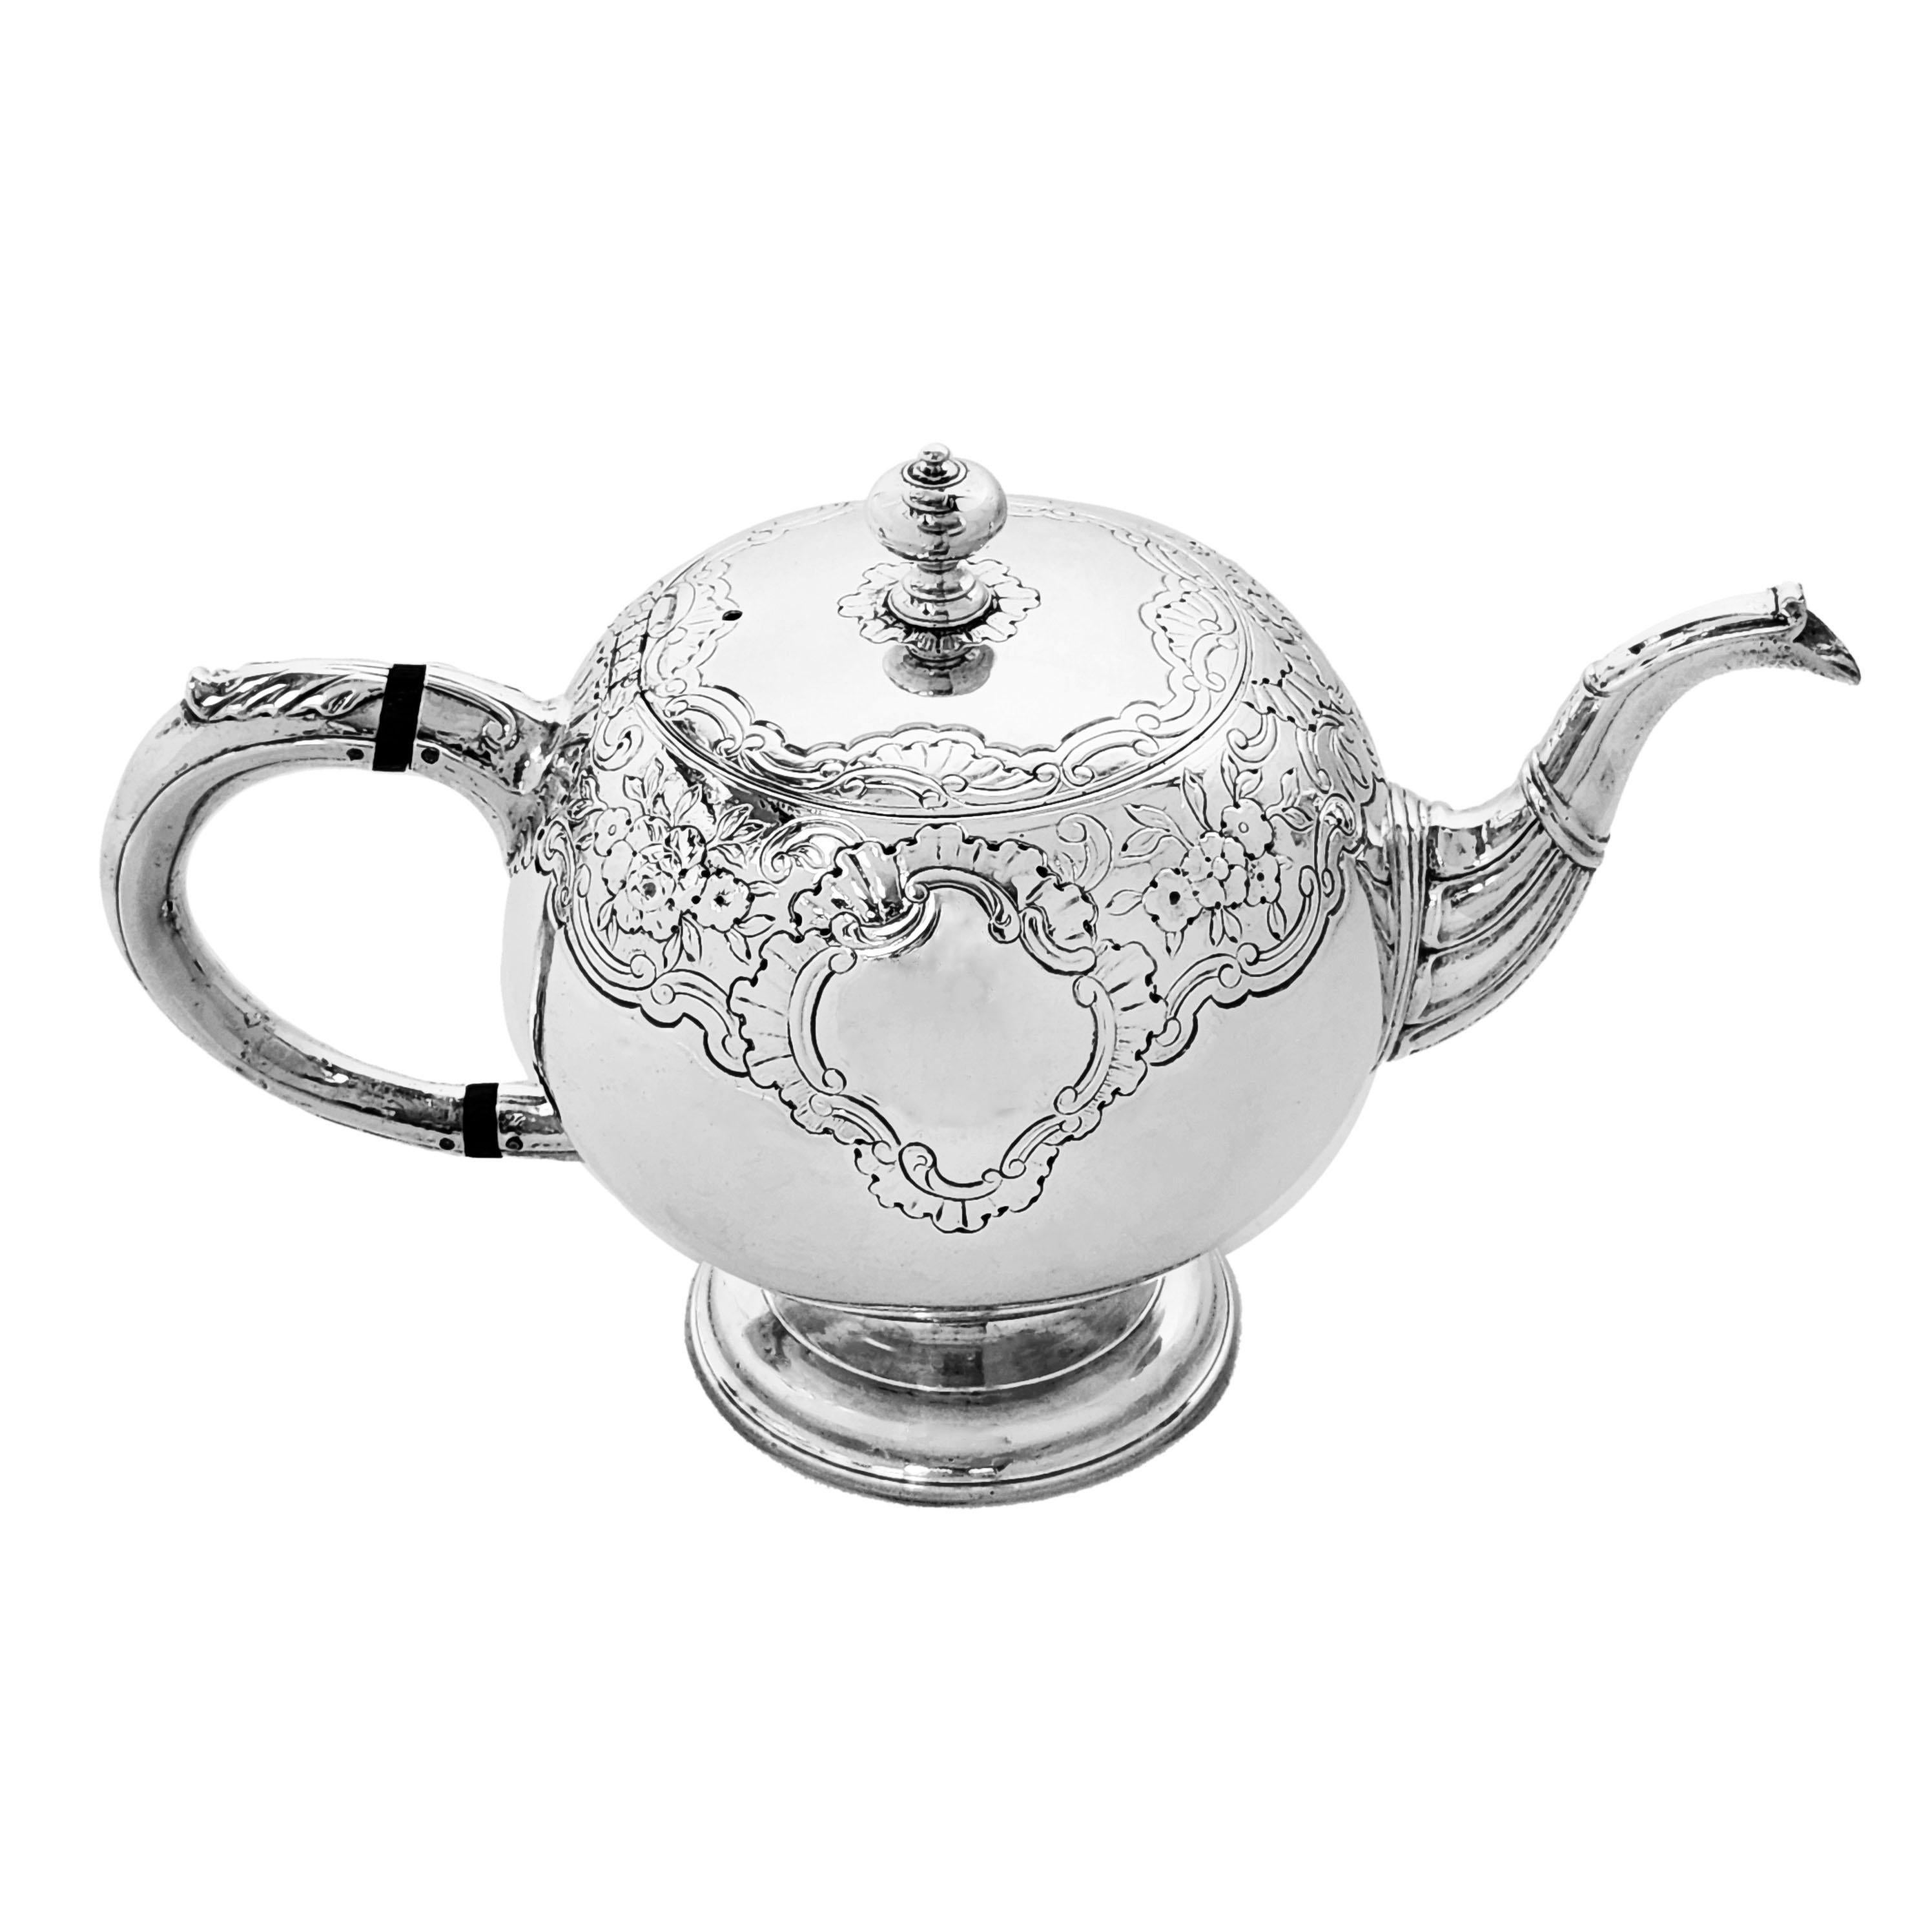 A beautiful Antique George II Scottish Silver Teapot in a classic round bullet shape. This Georgian Teapot is decorated with an lovely engraved design of floral and scroll patterns surrounding a pair of cartouches.

Made in Edinburgh, Scotland in